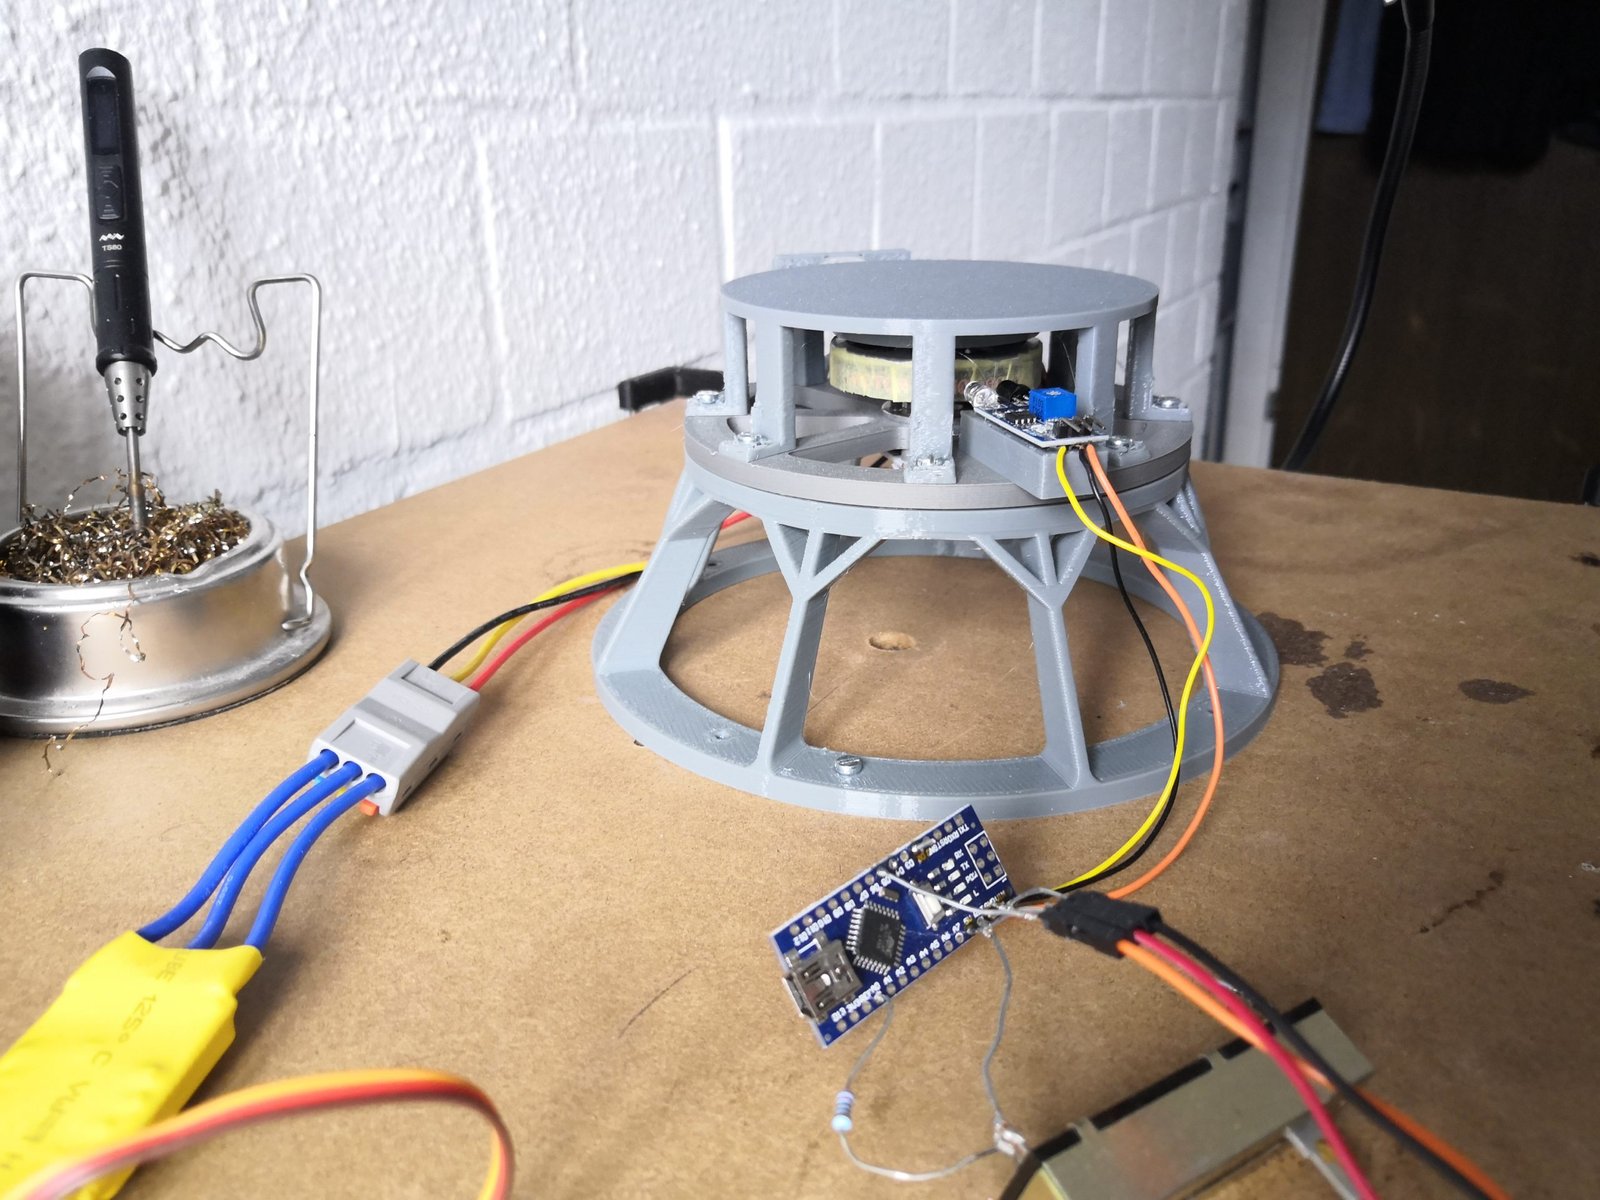 A general-purpose motor test and calibration stand